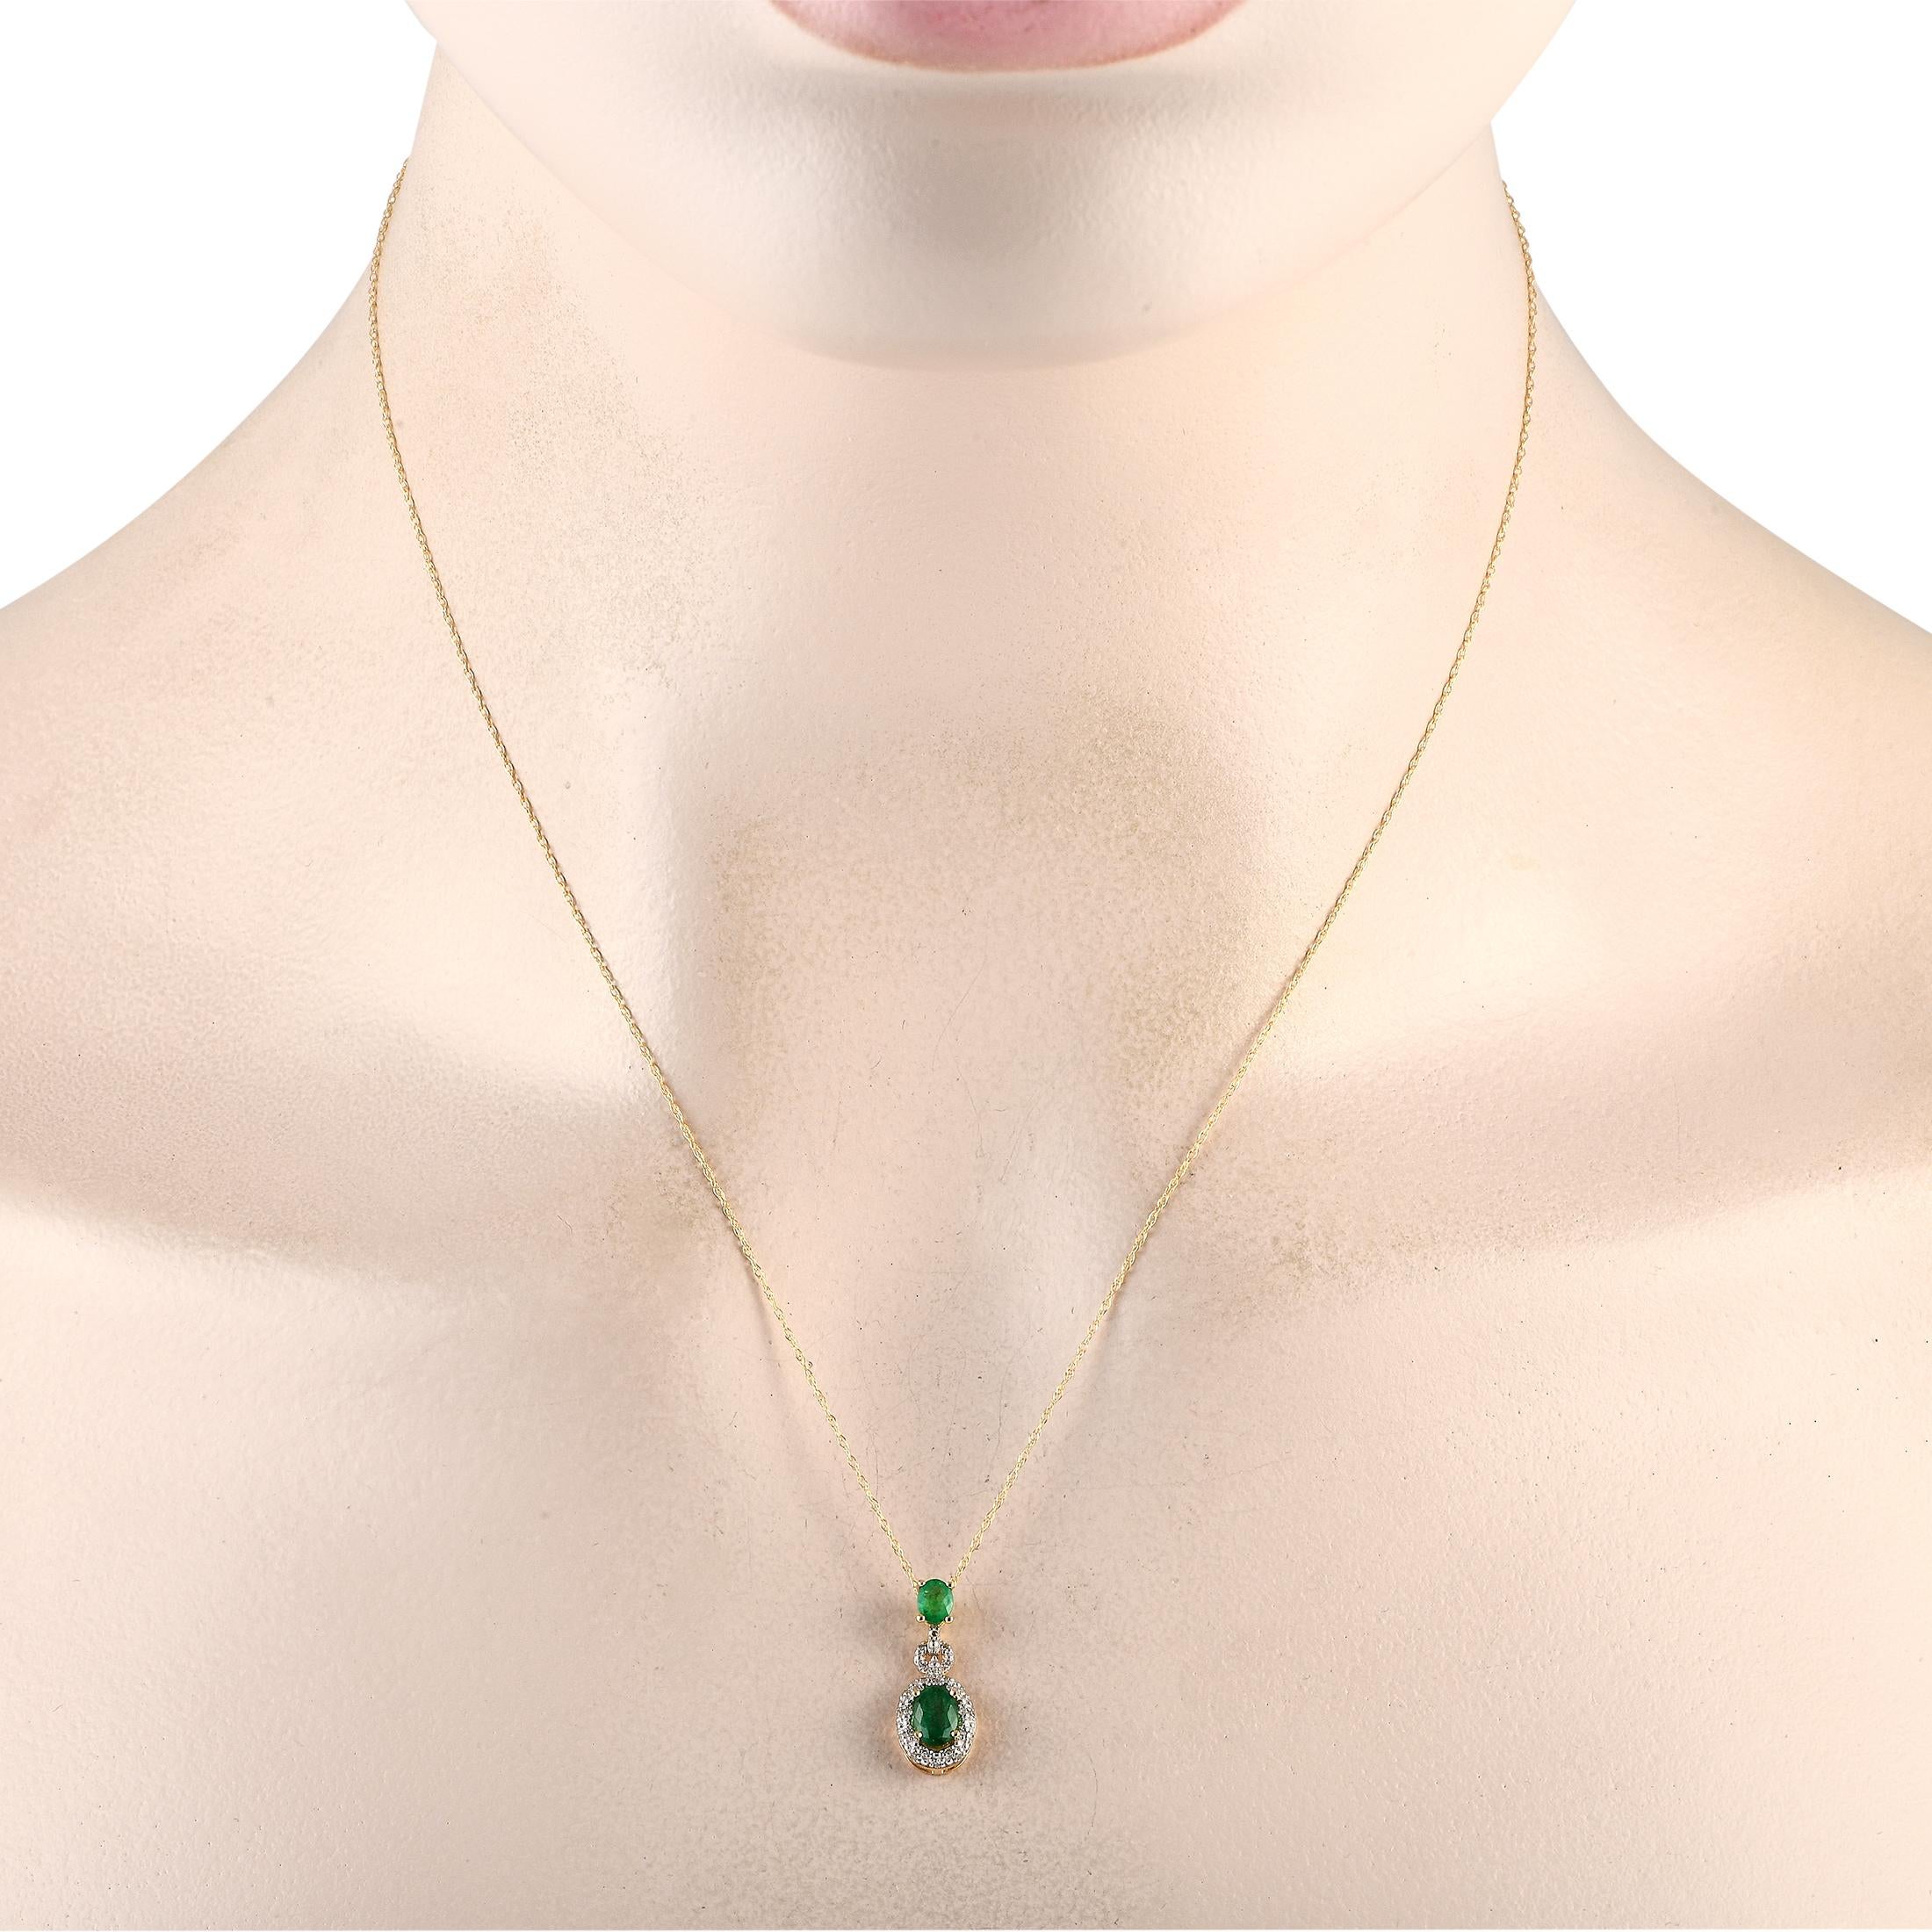 Refresh a monochromatic outfit with a necklace shining with the invigorating green hue of emerald. This LB Exclusive piece is crafted in 14K yellow gold and has an 18 chain. It captivates with its shimmering oval-cut emerald pendant surrounded by a